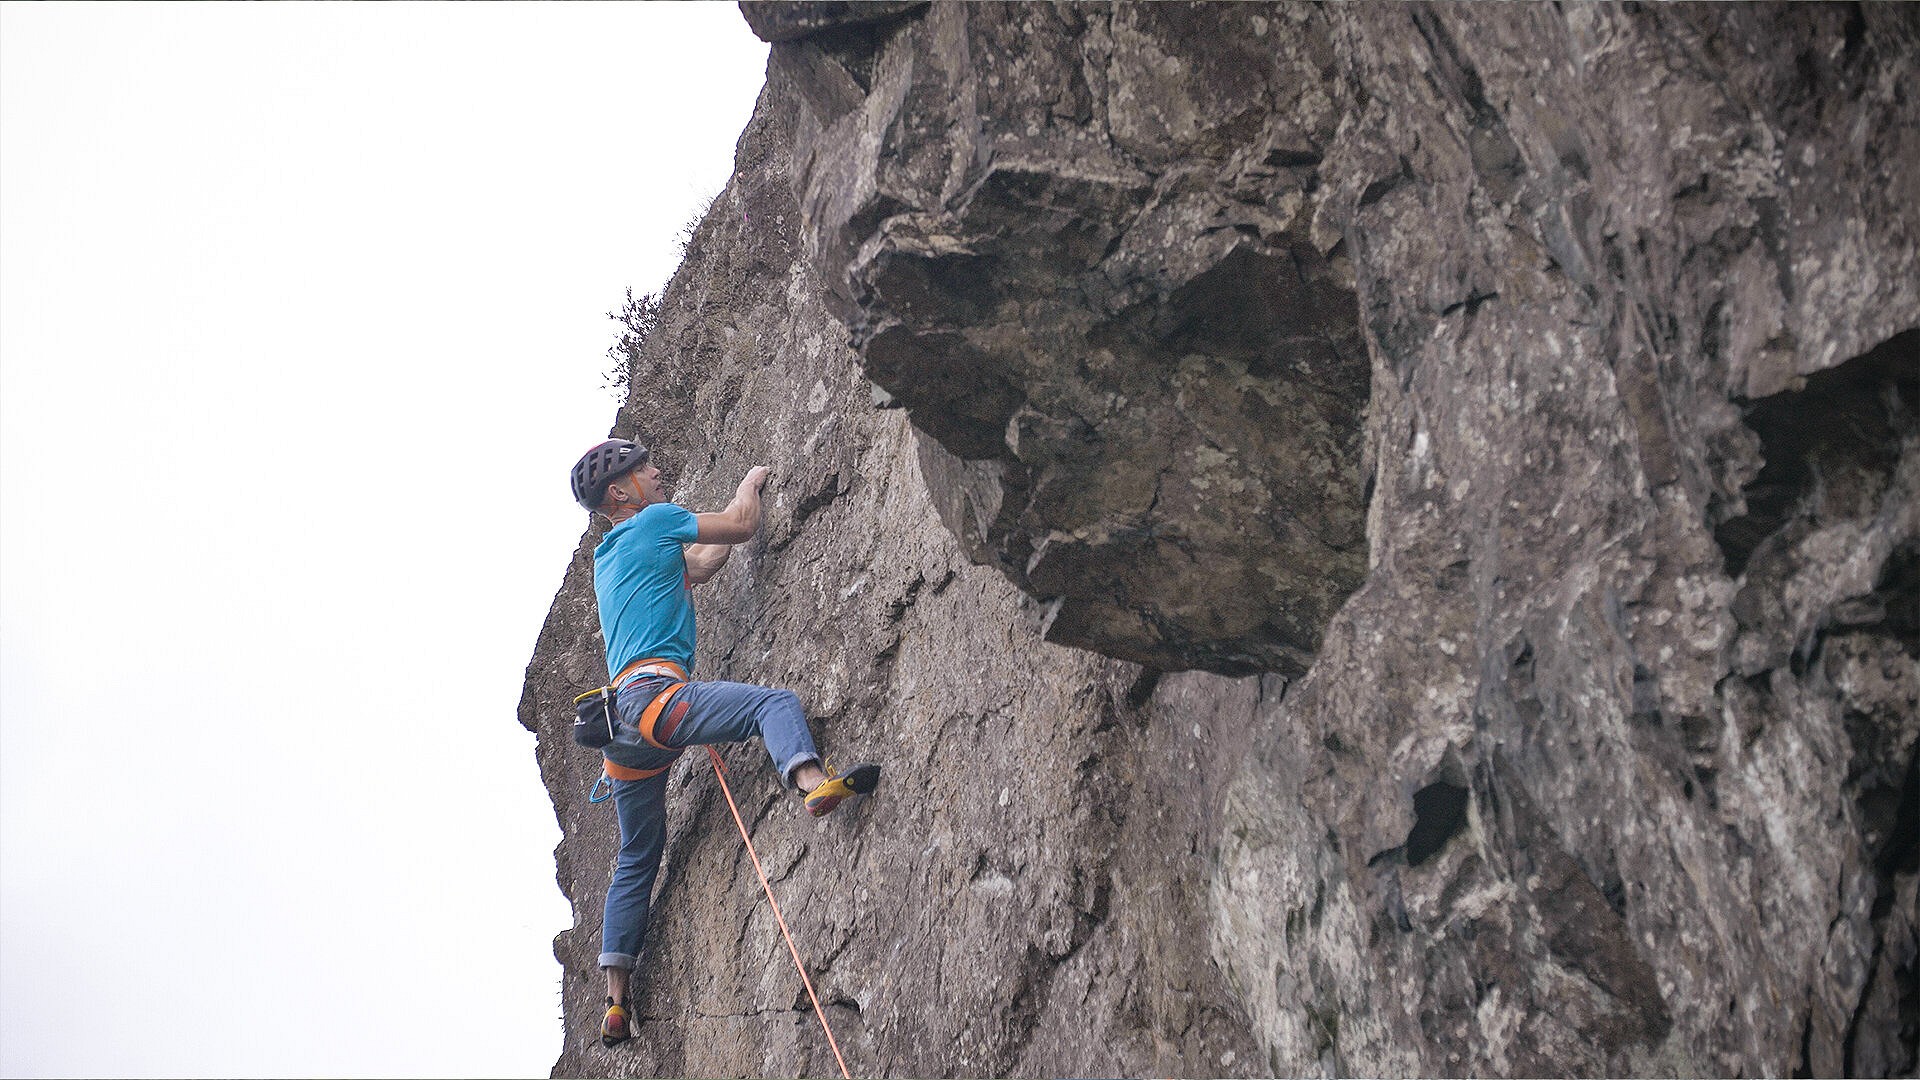 Neil high up on Ironed Out (E8 7a)  © Hugo Pilcher